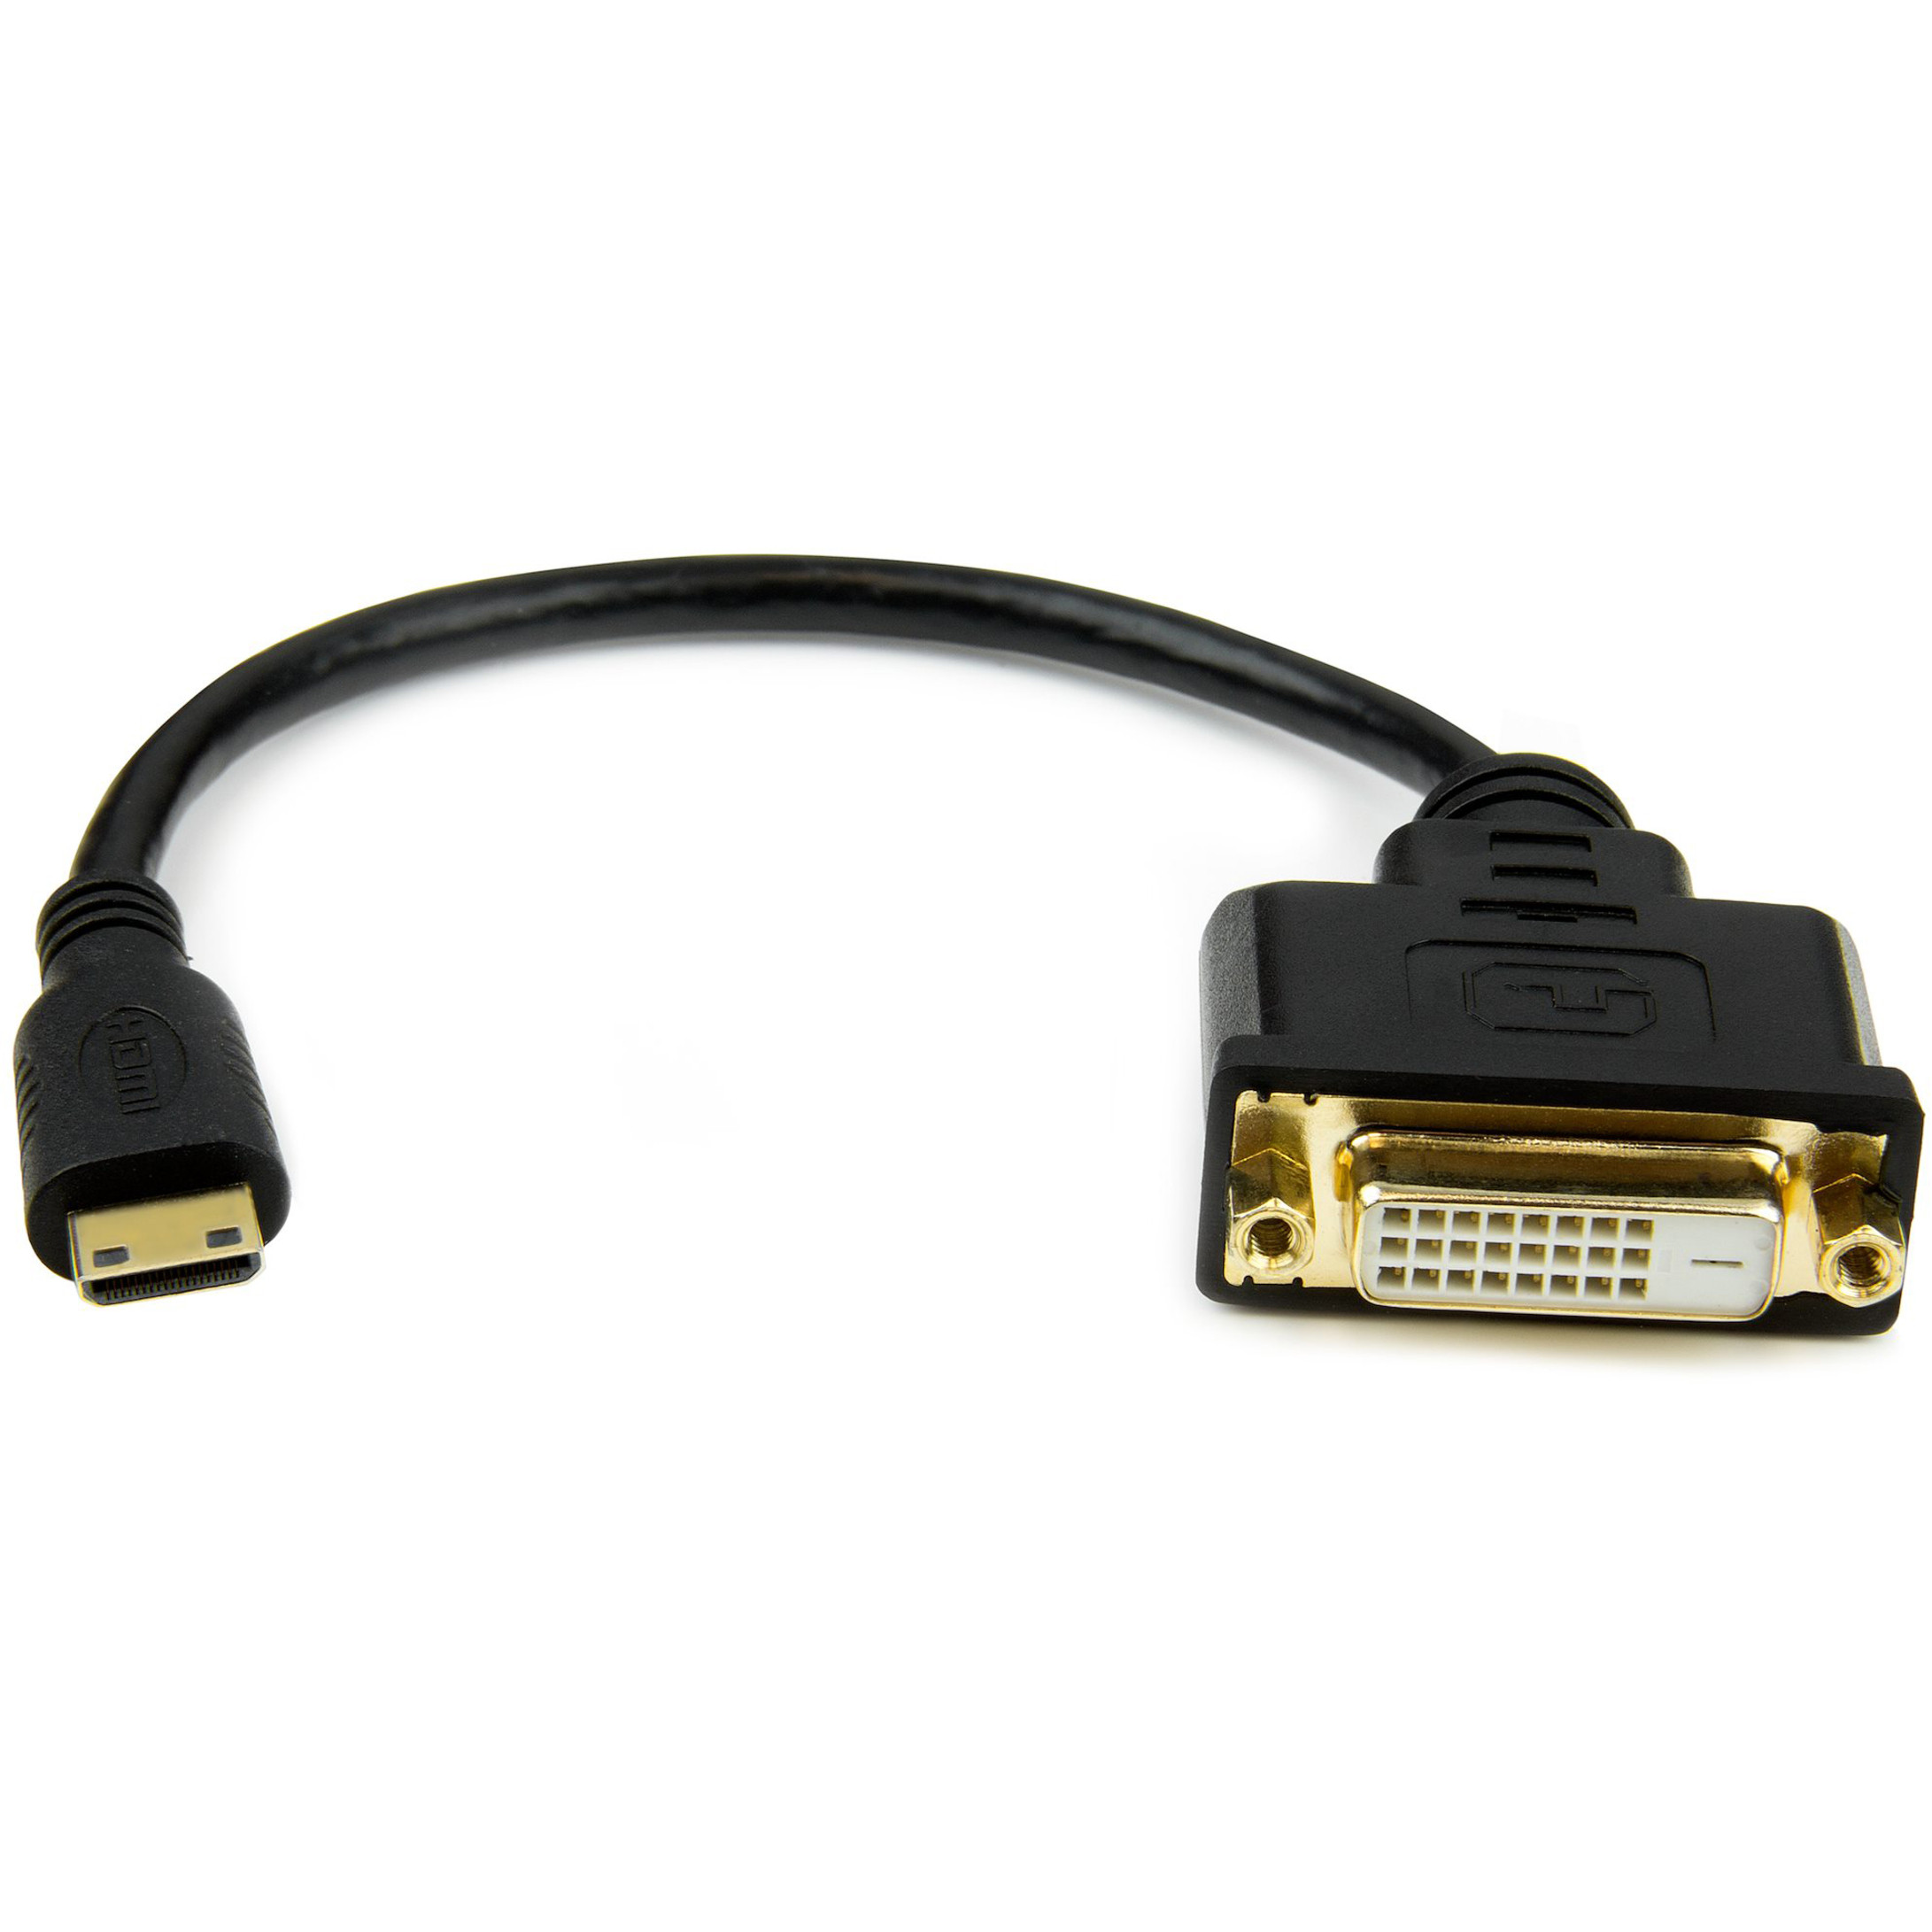 mengsel Monteur kat Startech .com 8 in (20cm) Mini HDMI to DVI Cable, DVI-D to HDMI Cable  (1920x1200p), HDMI Mini Male to DVI-D Female Display Cable Adapter8i...  HDCDVIMF8IN - Corporate Armor